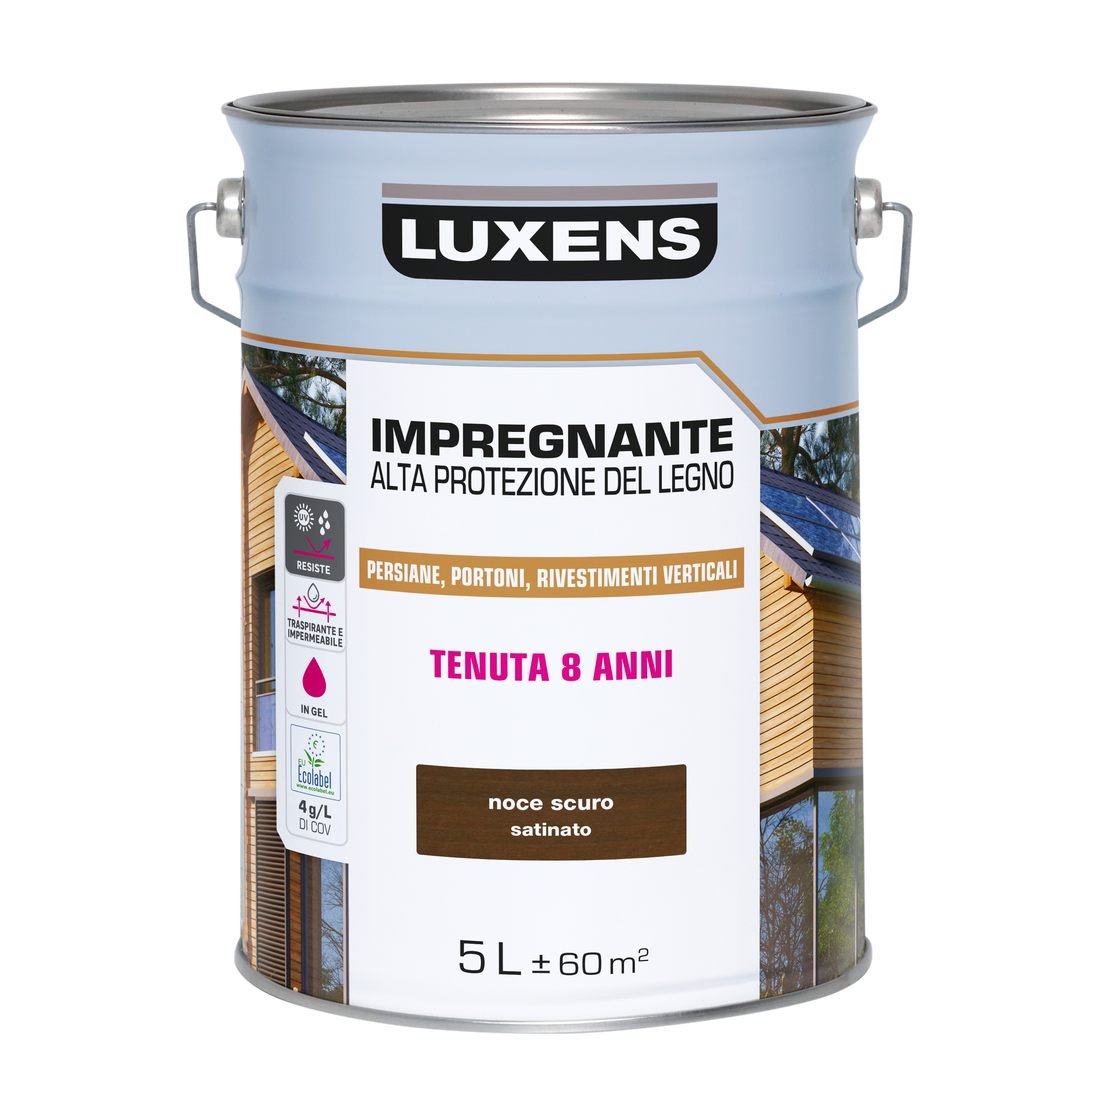 WATER-BASED WOOD PRESERVATIVE ANTIQUE WALNUT HIGH PROTECTION LUXENS 5 LT